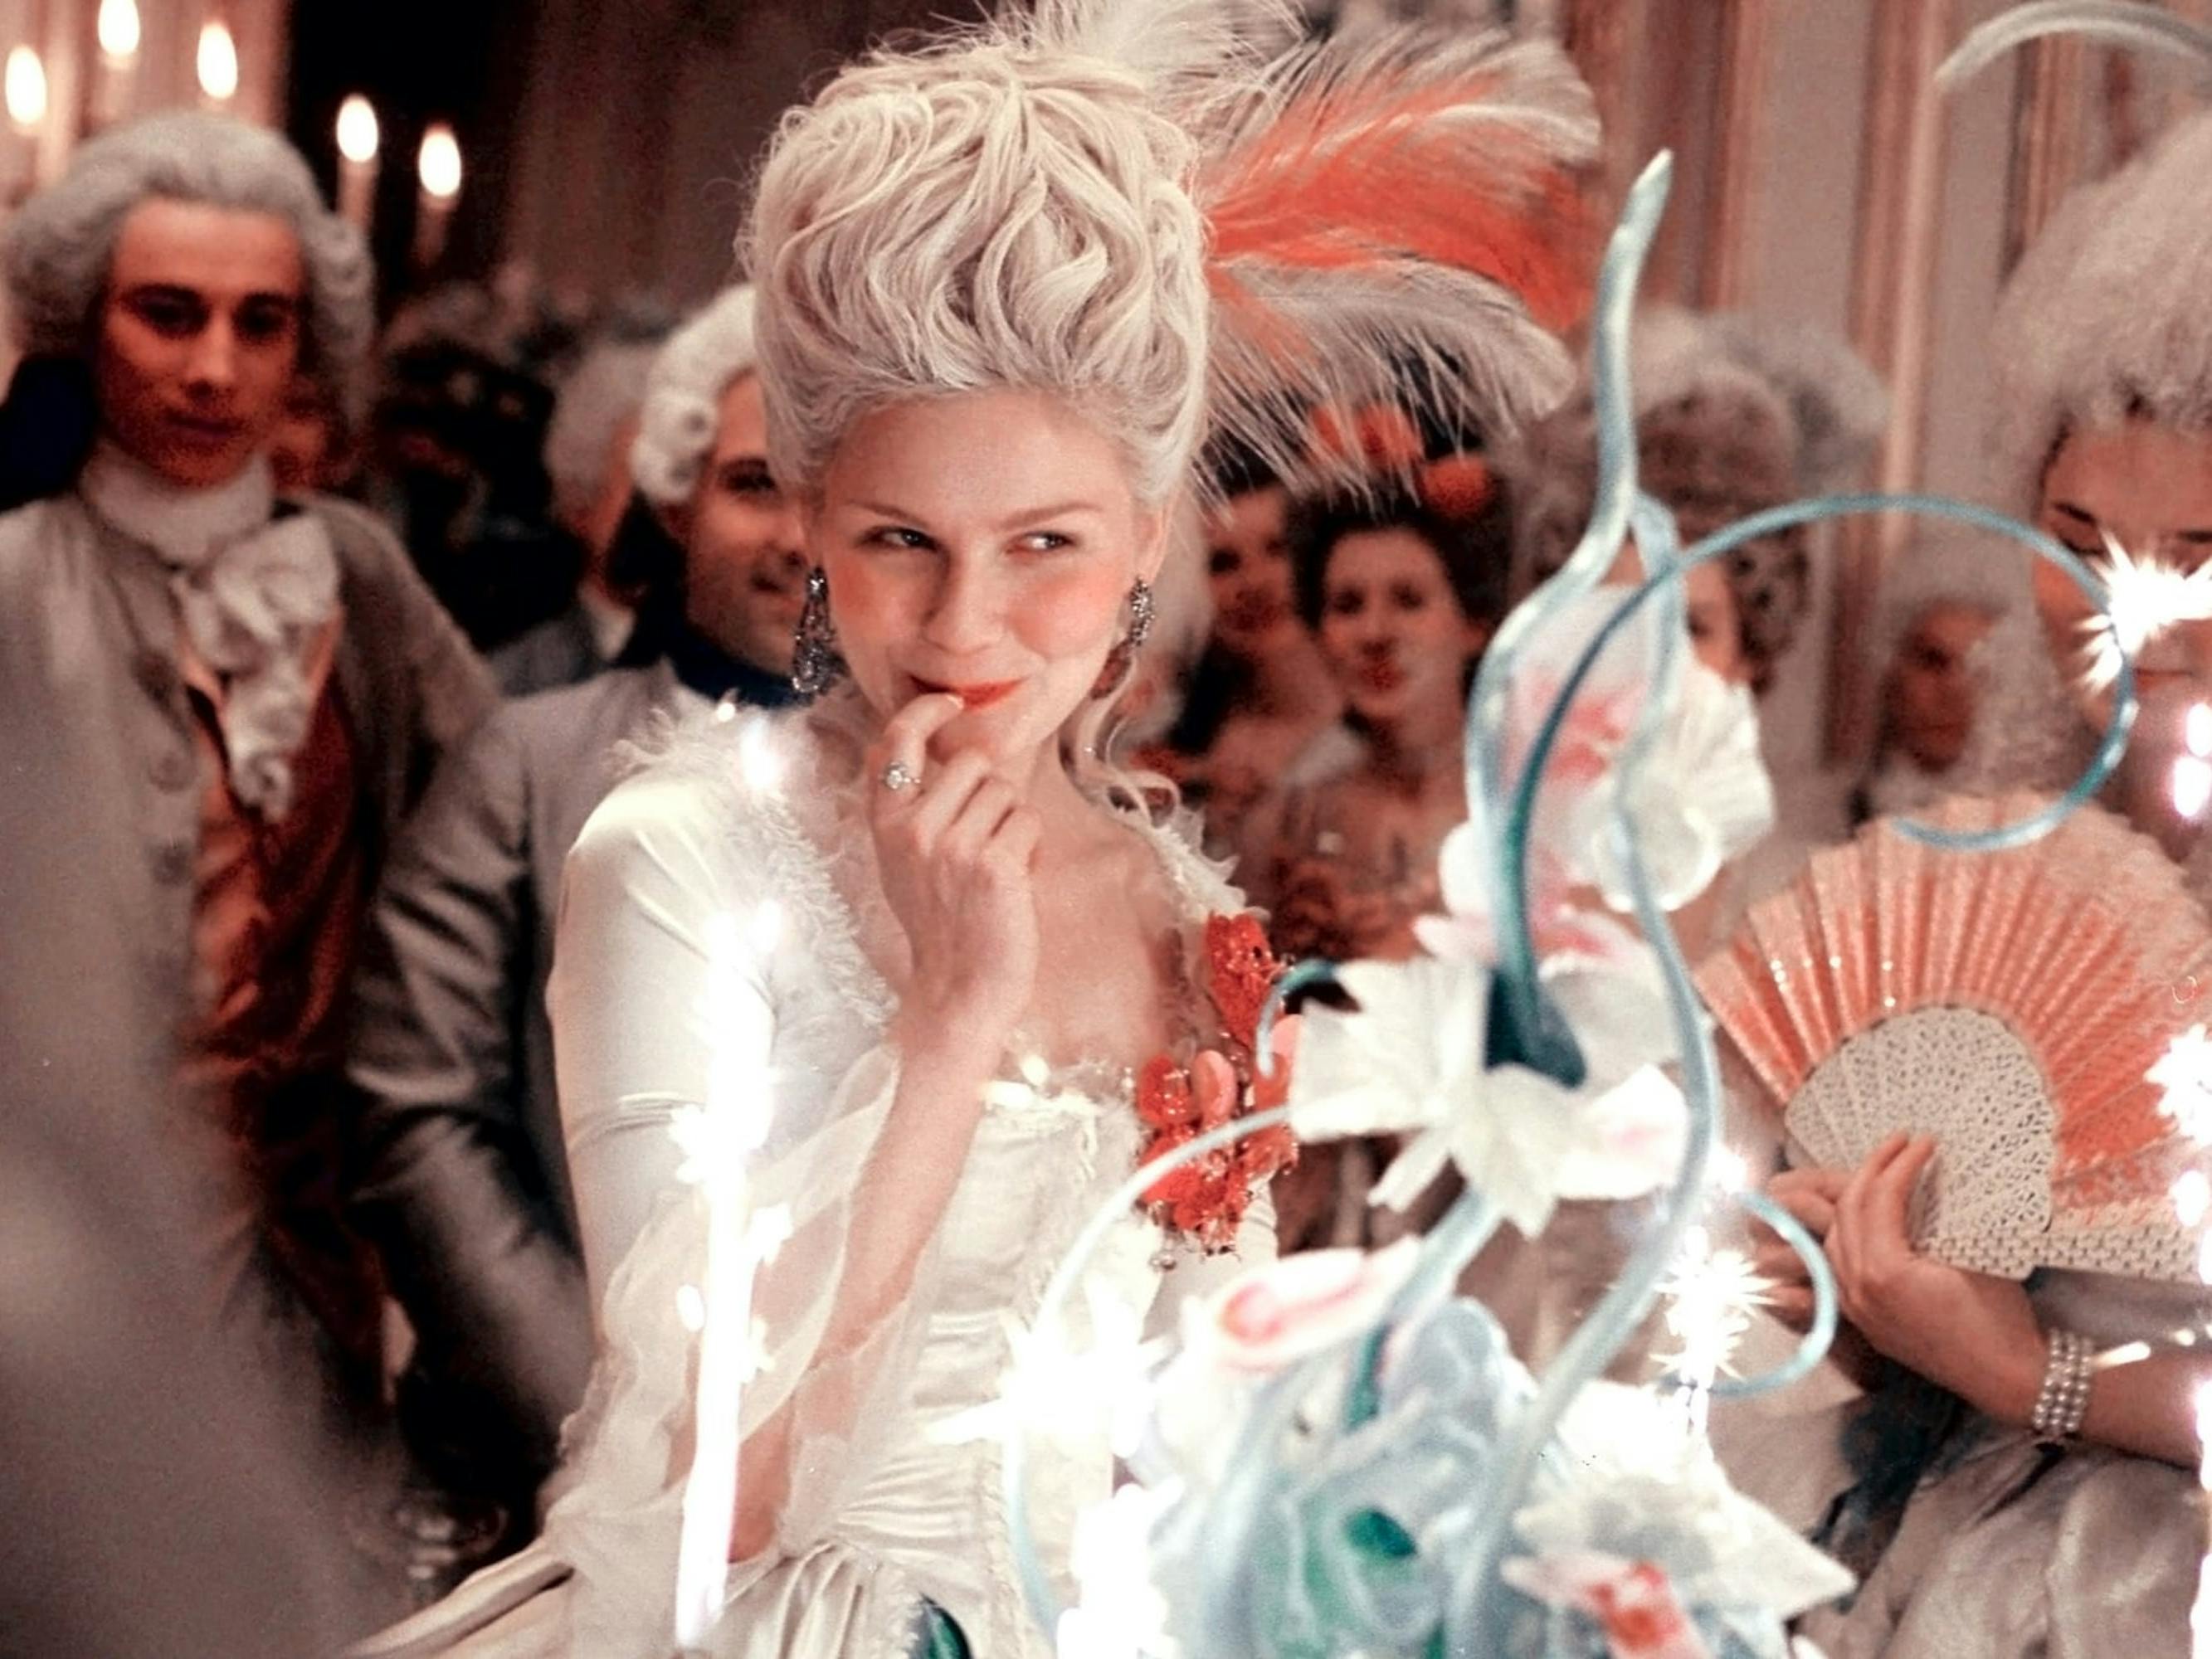 Marie Antoinette (Kirsten Dunst) wears her hair high and a silky white dress. She’s surrounded by many others in similar garb.